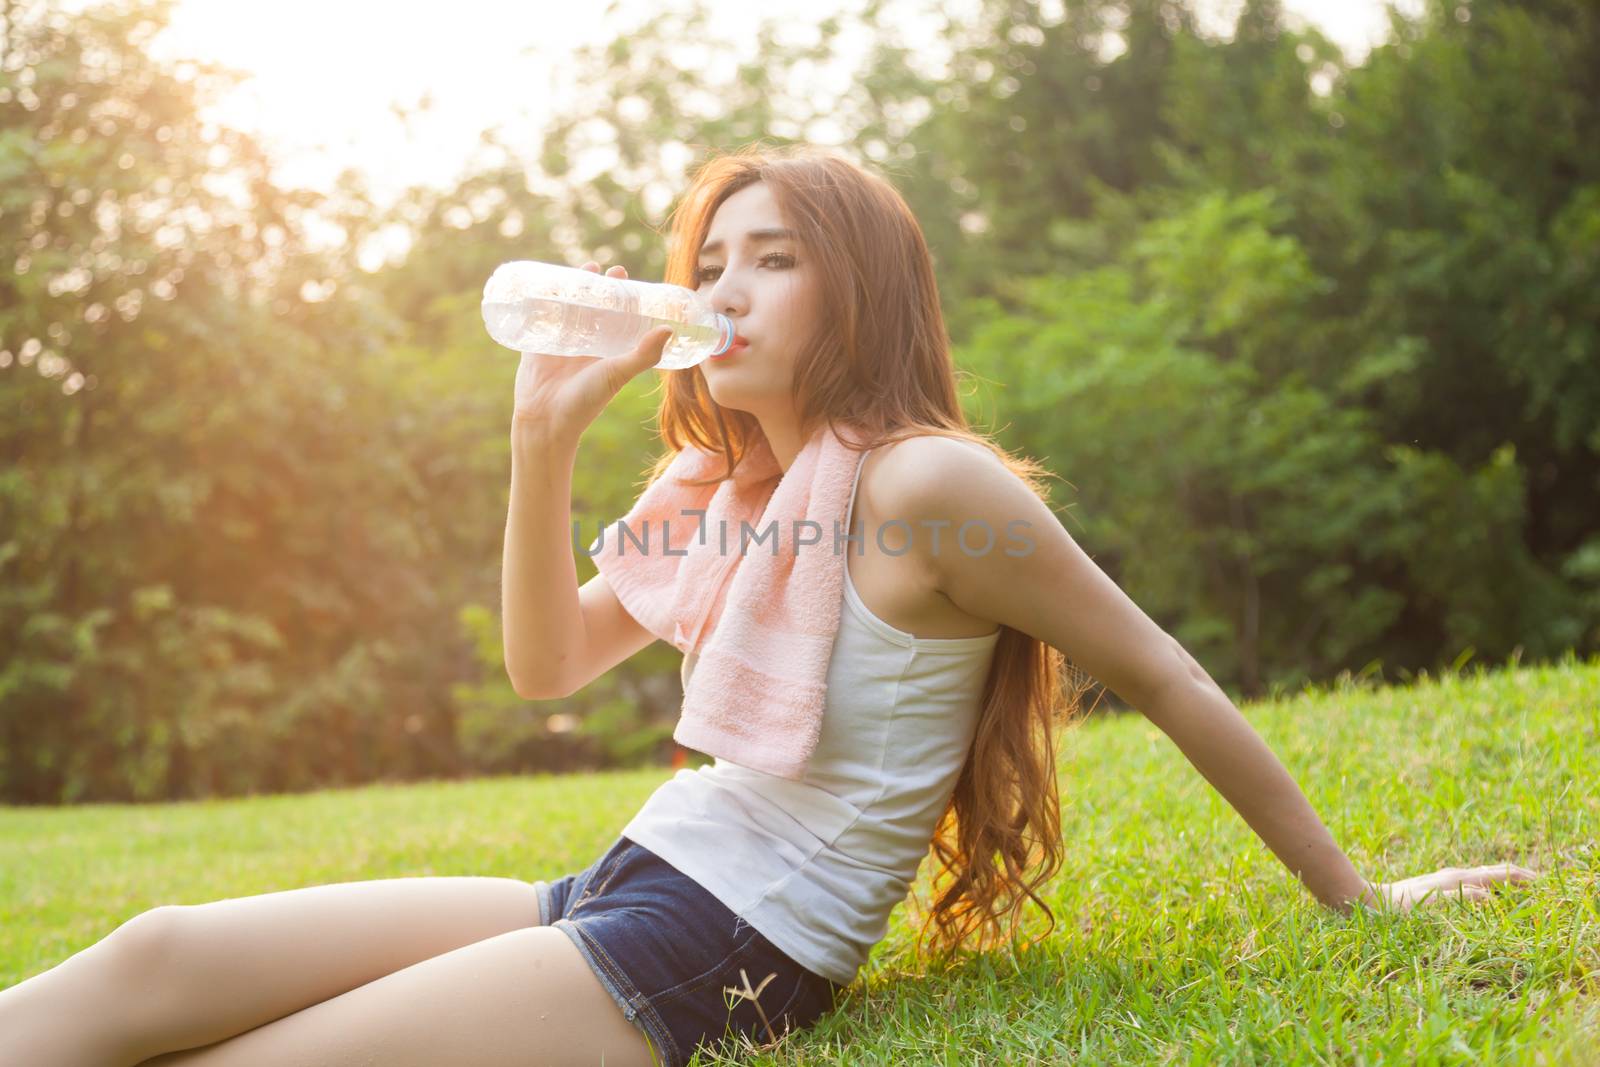 Woman sitting tired and drinking water after exercise. Within the lawn of park.